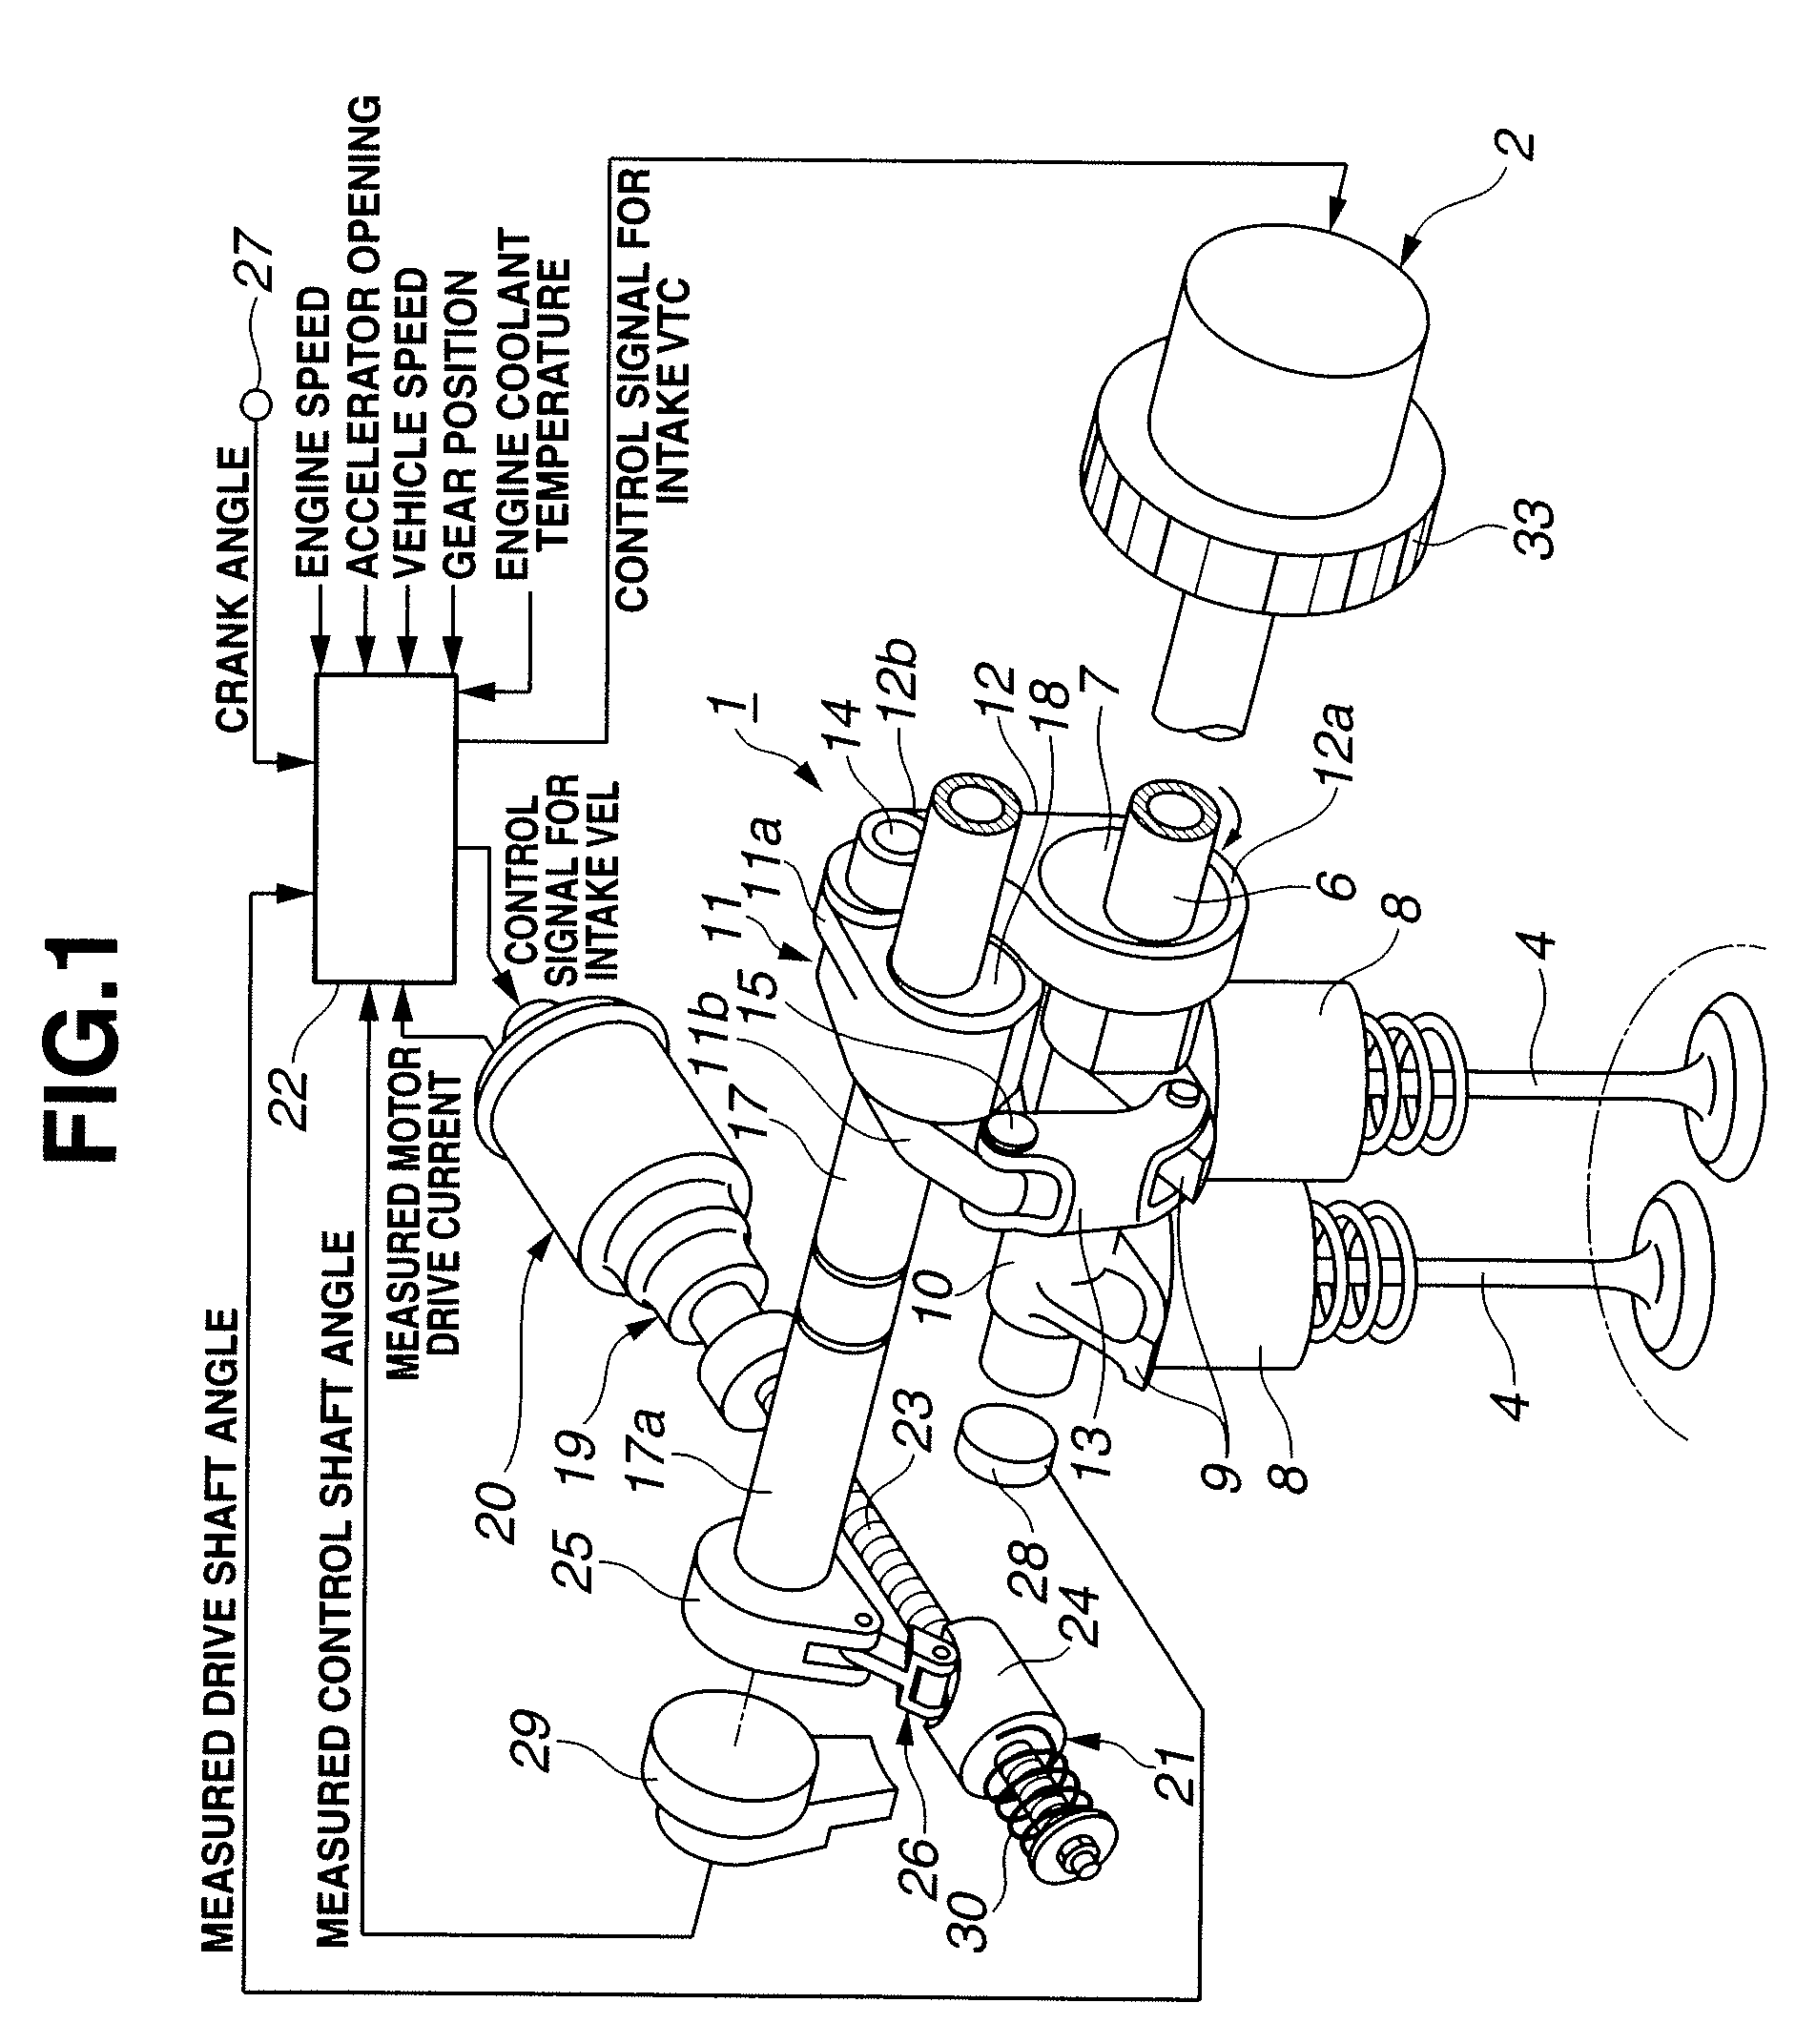 Variable valve actuating apparatus for internal combustion engine